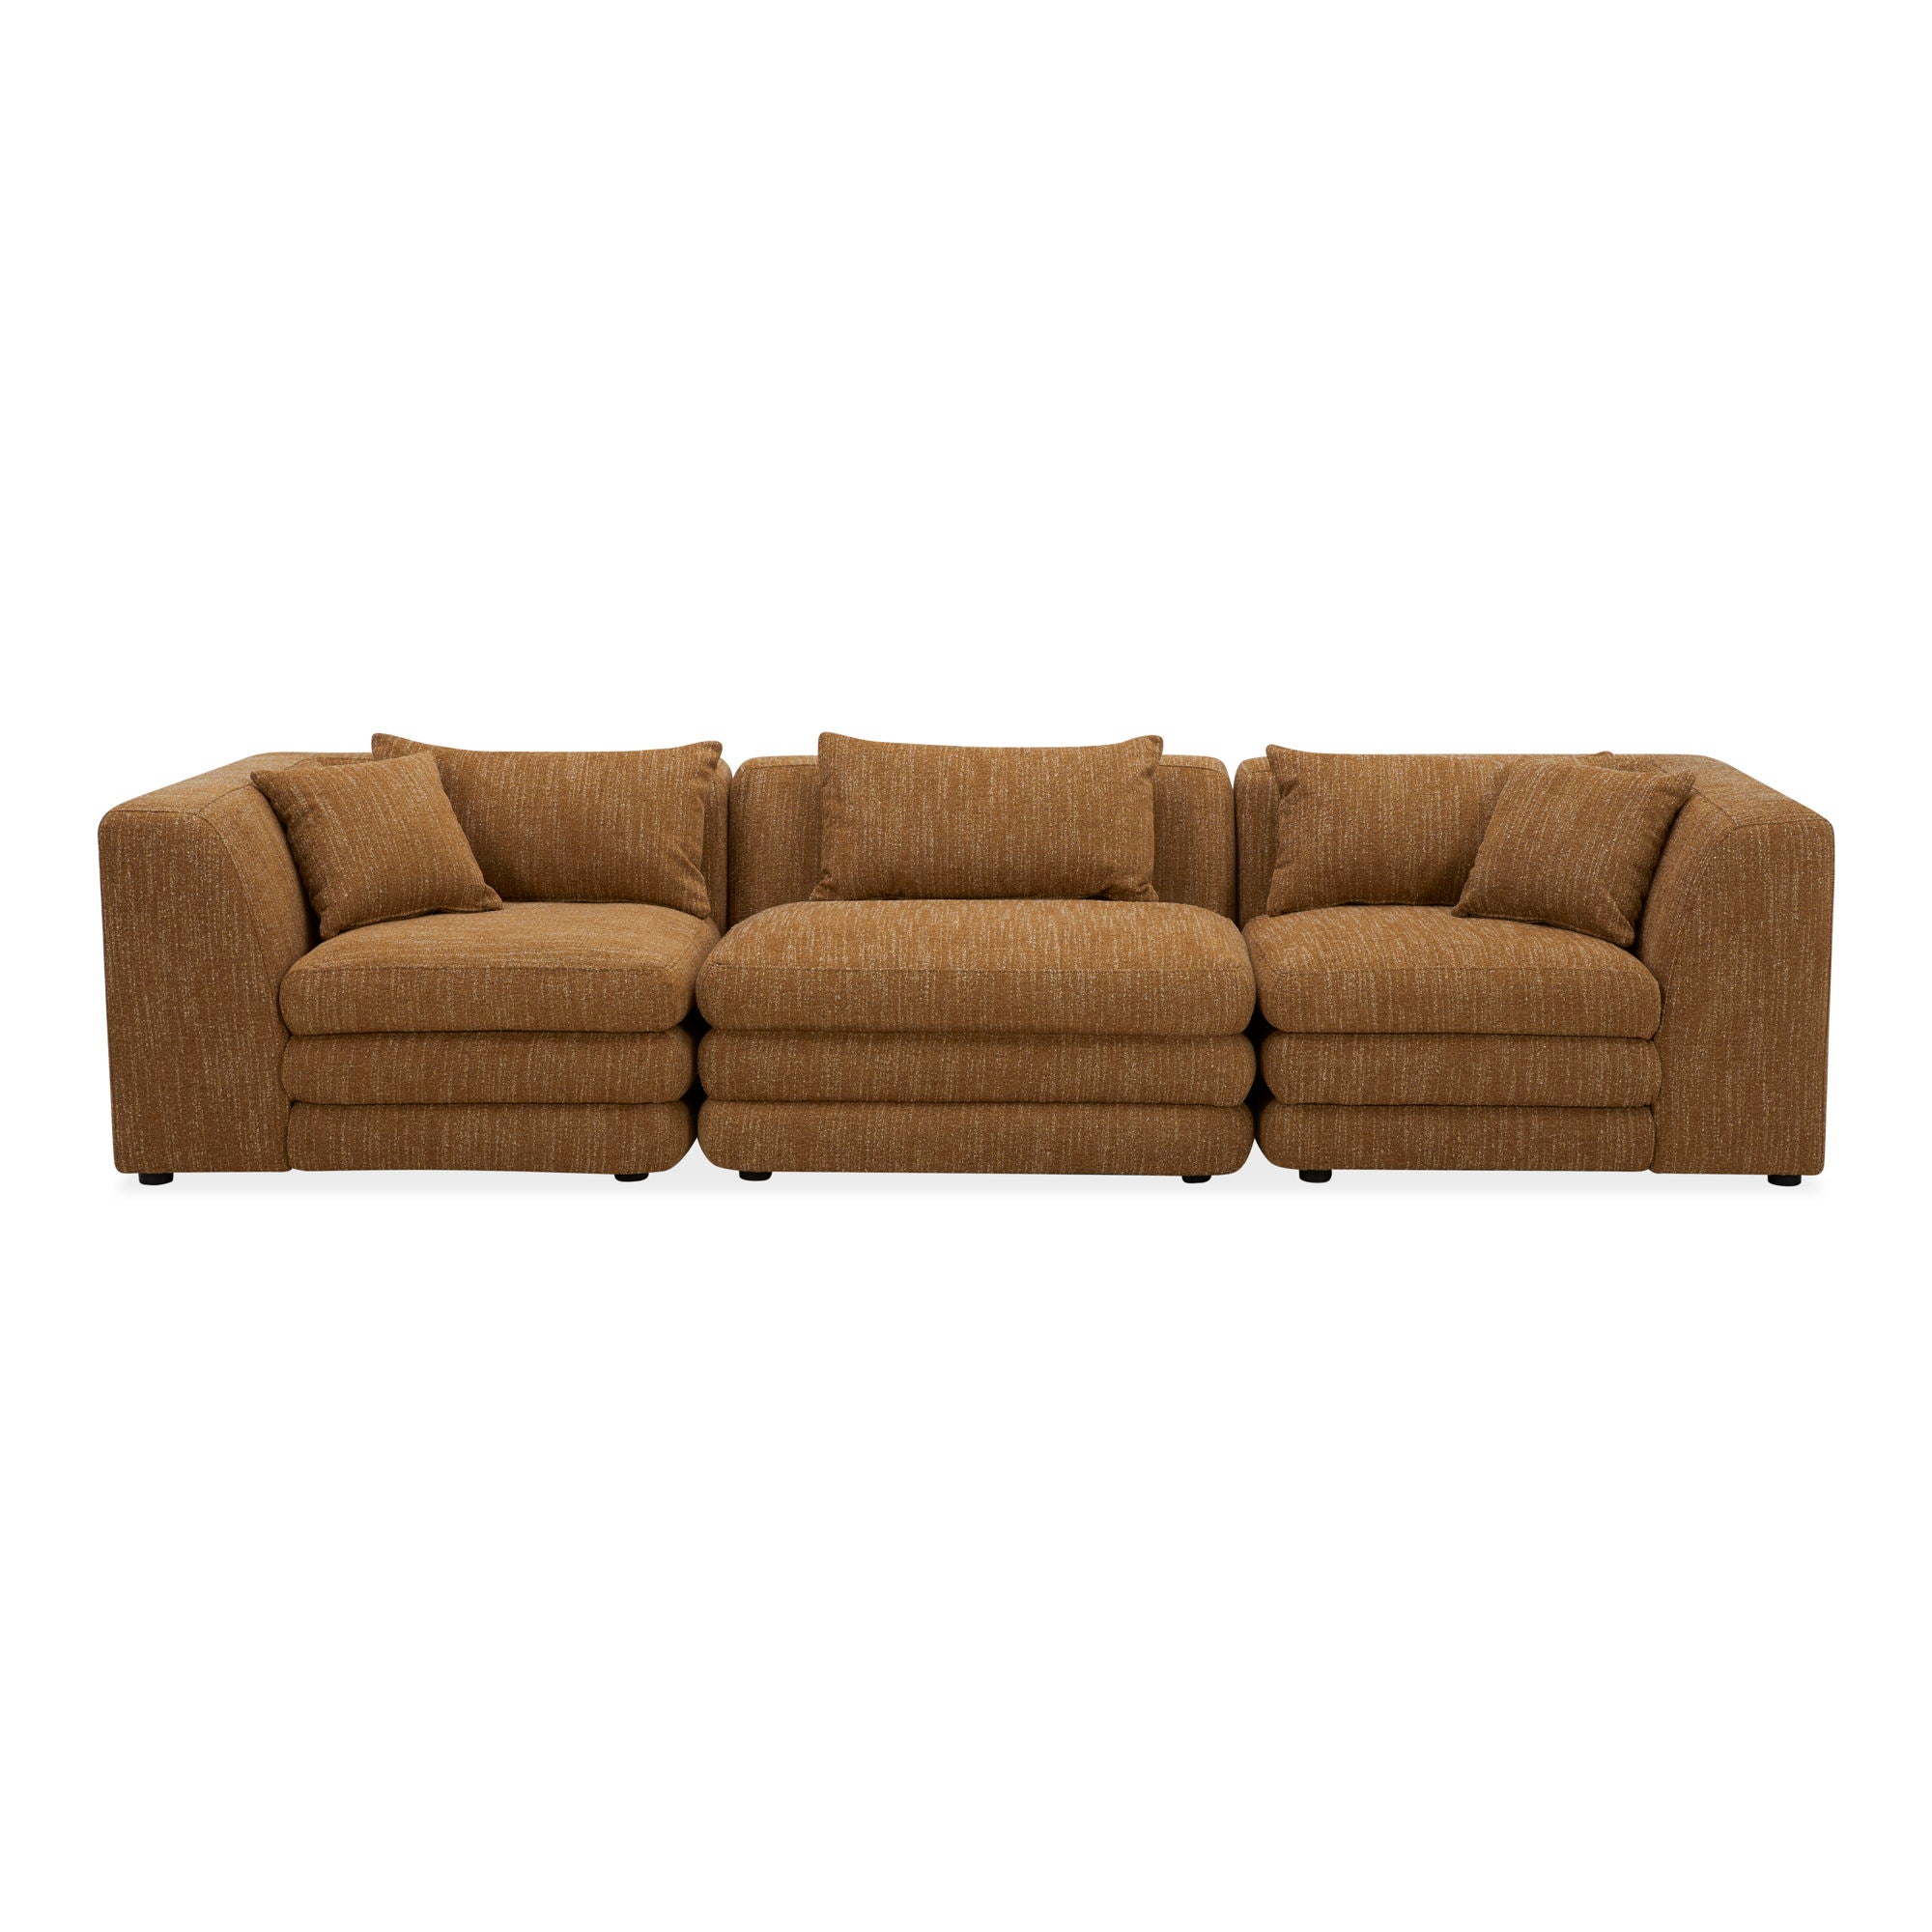 Lowtide - Modular Sofa - Amber Glow-Stationary Sectionals-American Furniture Outlet